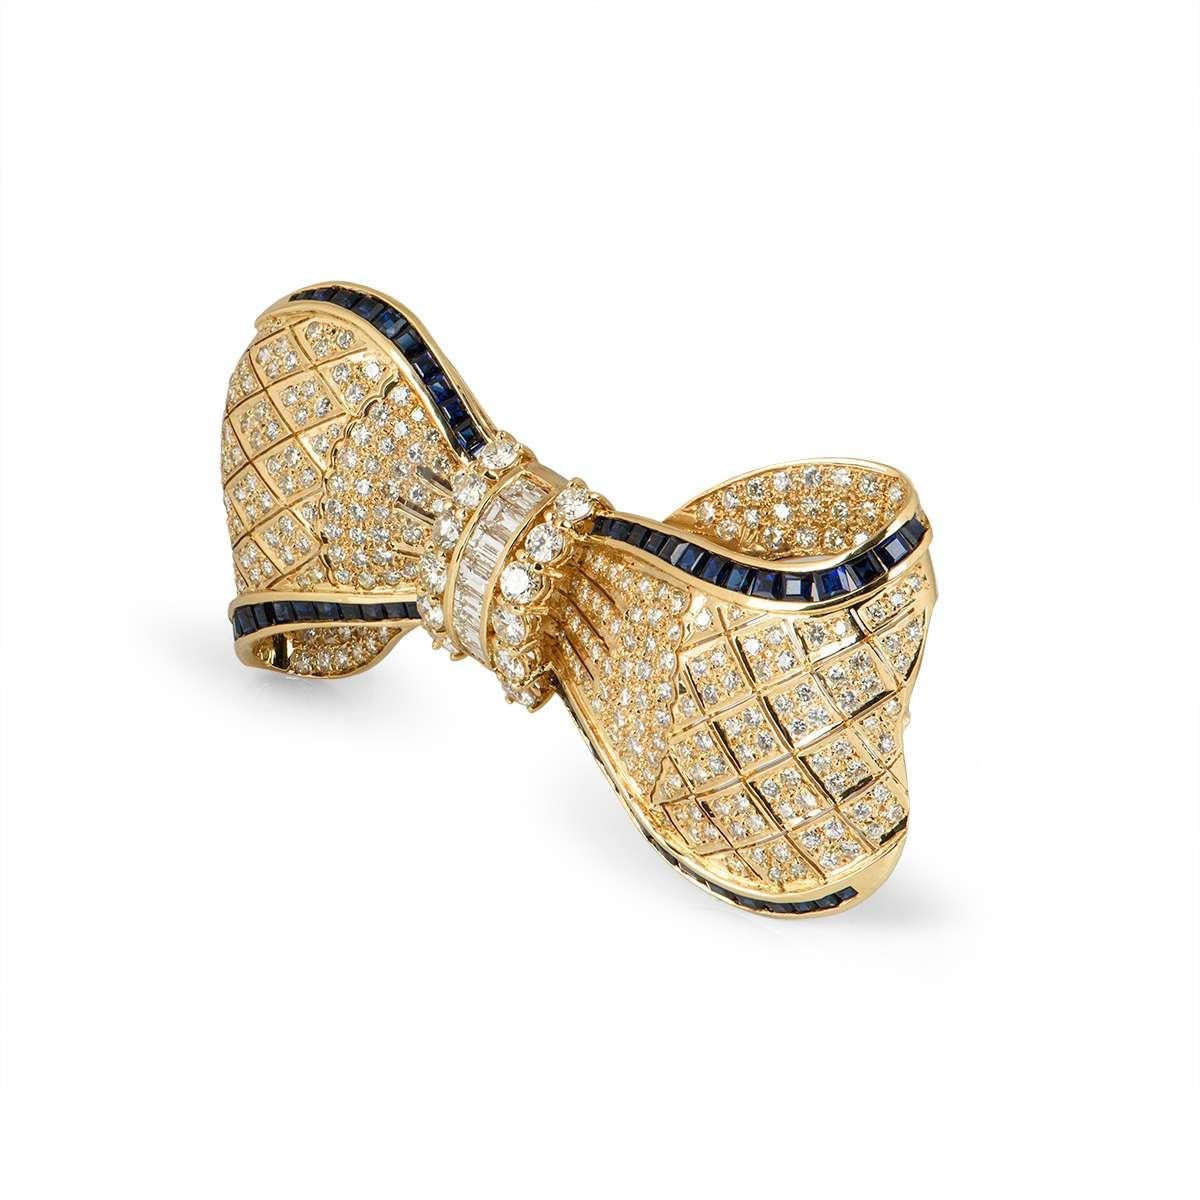 An 18k yellow gold Bow brooch. The brooch is set to the centre with baguette and round brilliant cut diamonds. The outer sides of the Bow are pave set with round brilliant cut diamonds and square cut blue sapphires. The diamonds have a total weight